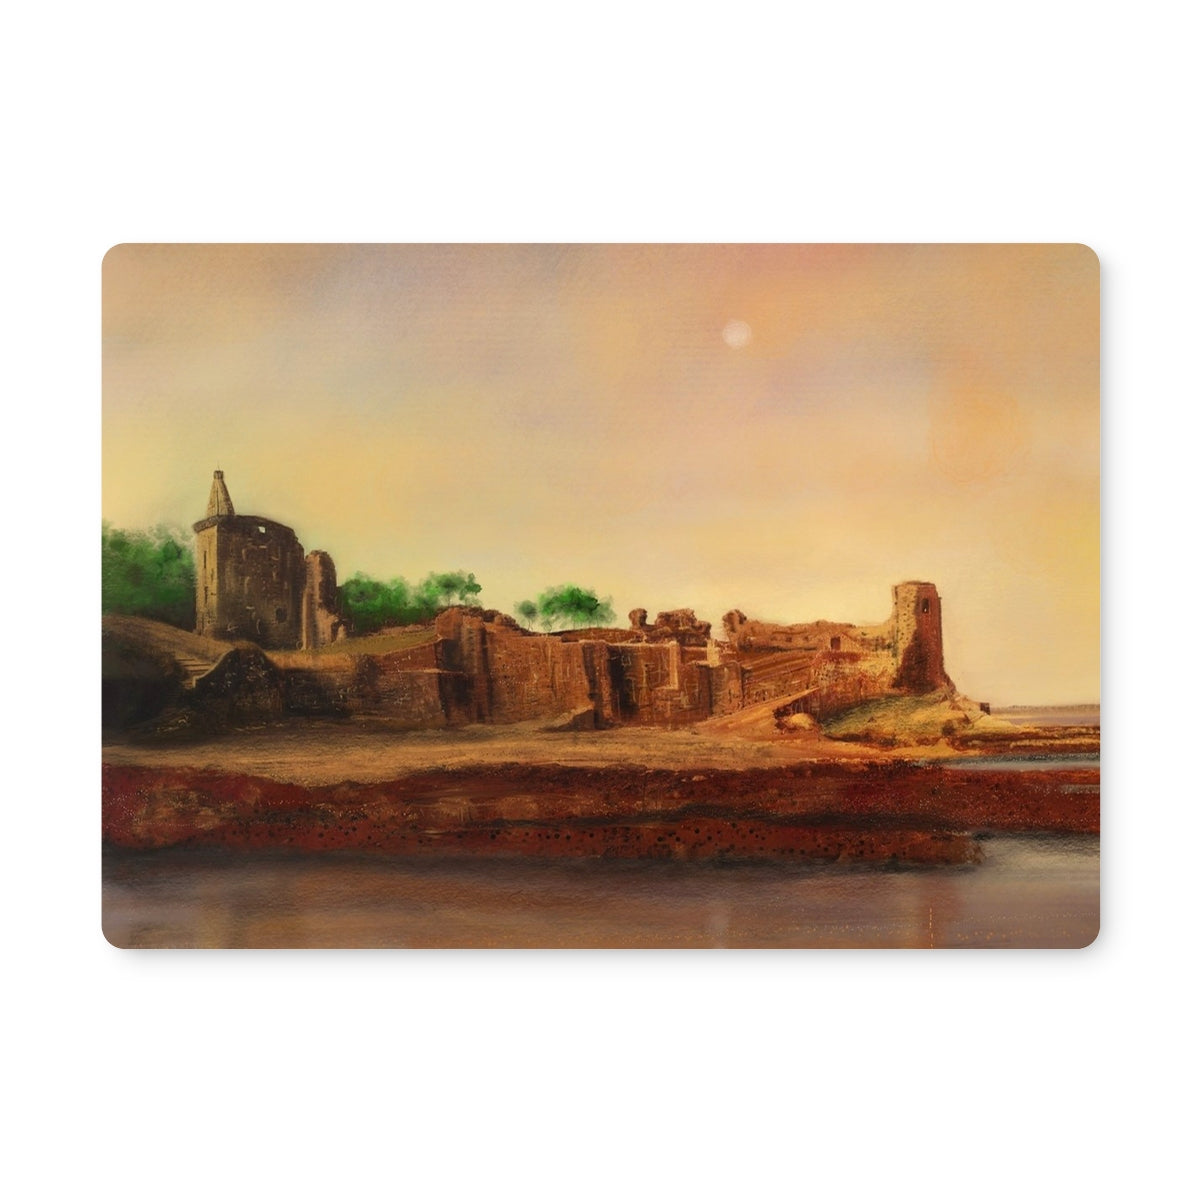 St Andrews Castle Art Gifts Placemat-Placemats-Historic & Iconic Scotland Art Gallery-Single Placemat-Paintings, Prints, Homeware, Art Gifts From Scotland By Scottish Artist Kevin Hunter